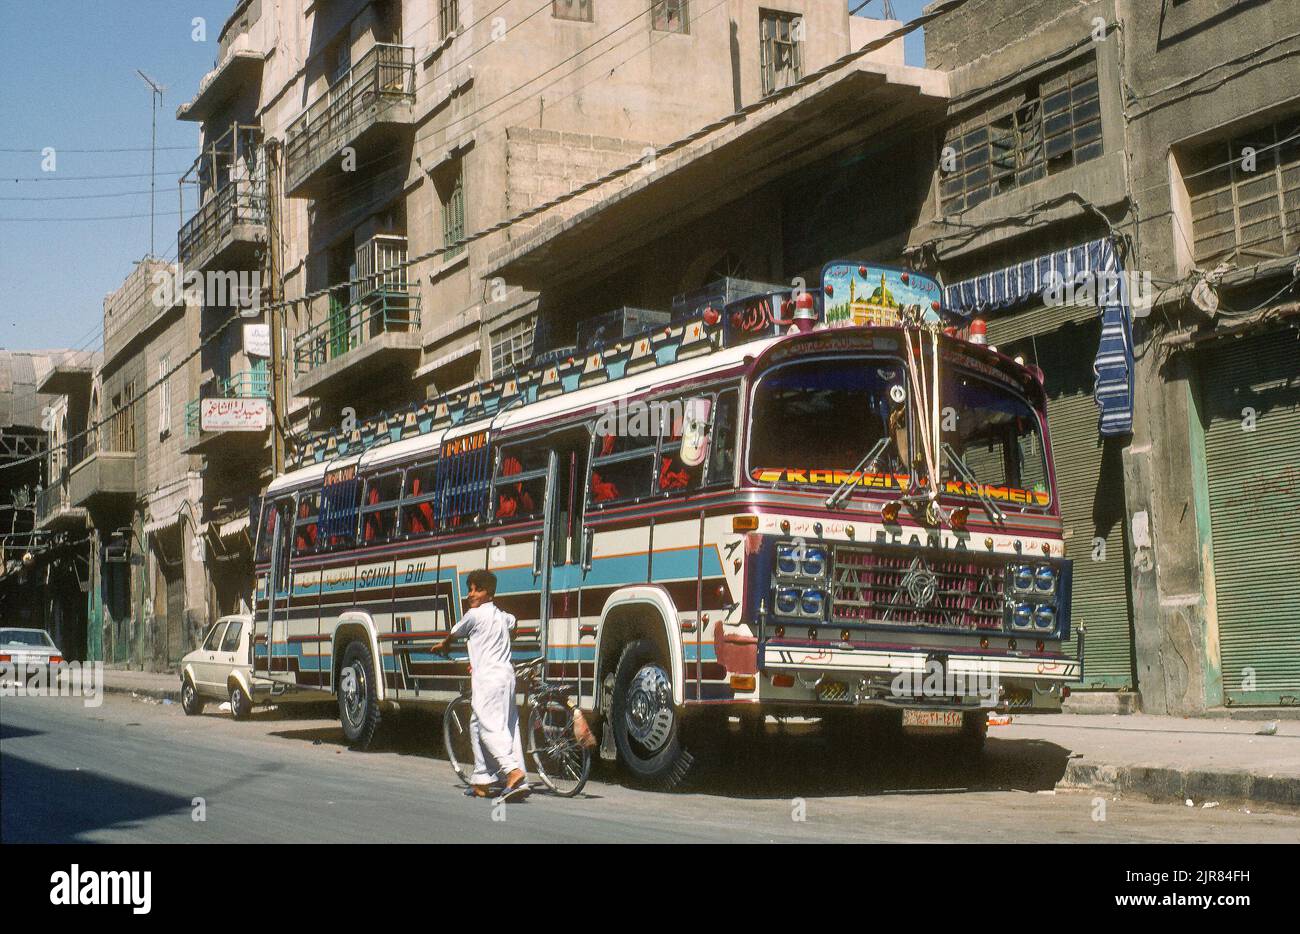 Street scene in Damascus, 1985. The gaudily-decorated bus evokes the era of overland travel across western Asia Stock Photo